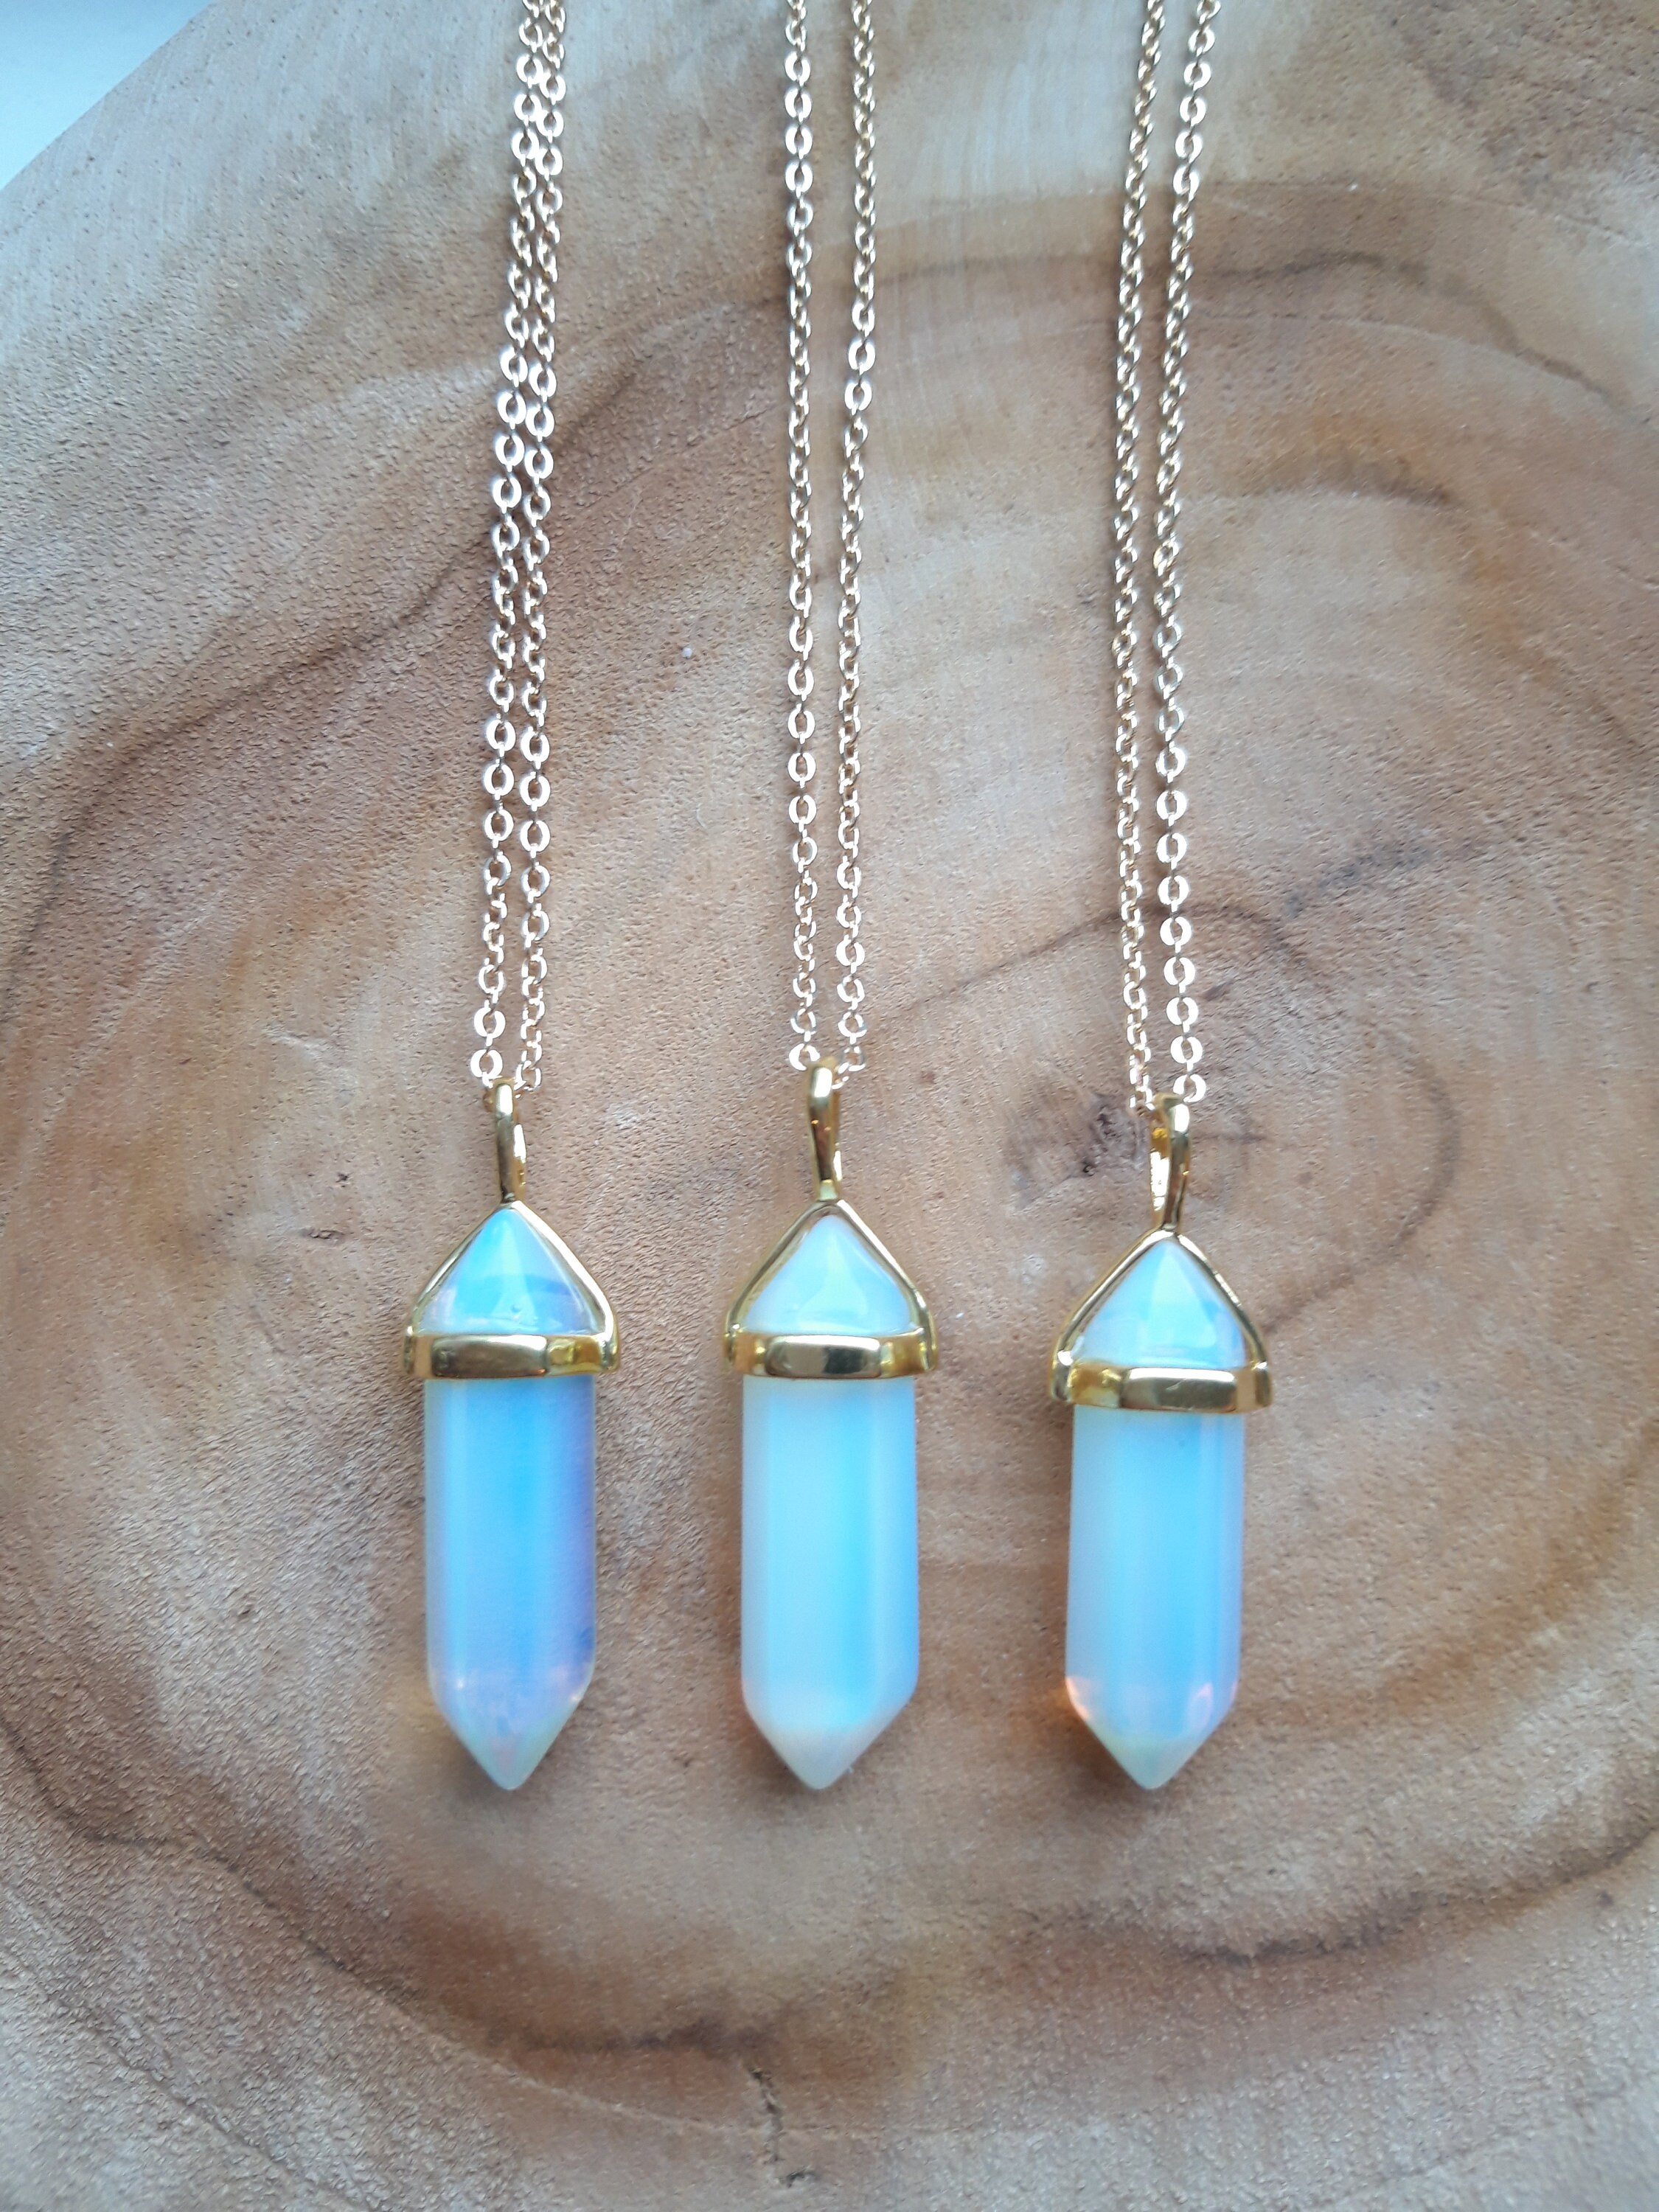 Stone/Crystal Holder Necklace with Opalite Crystal - Crystal Junkie